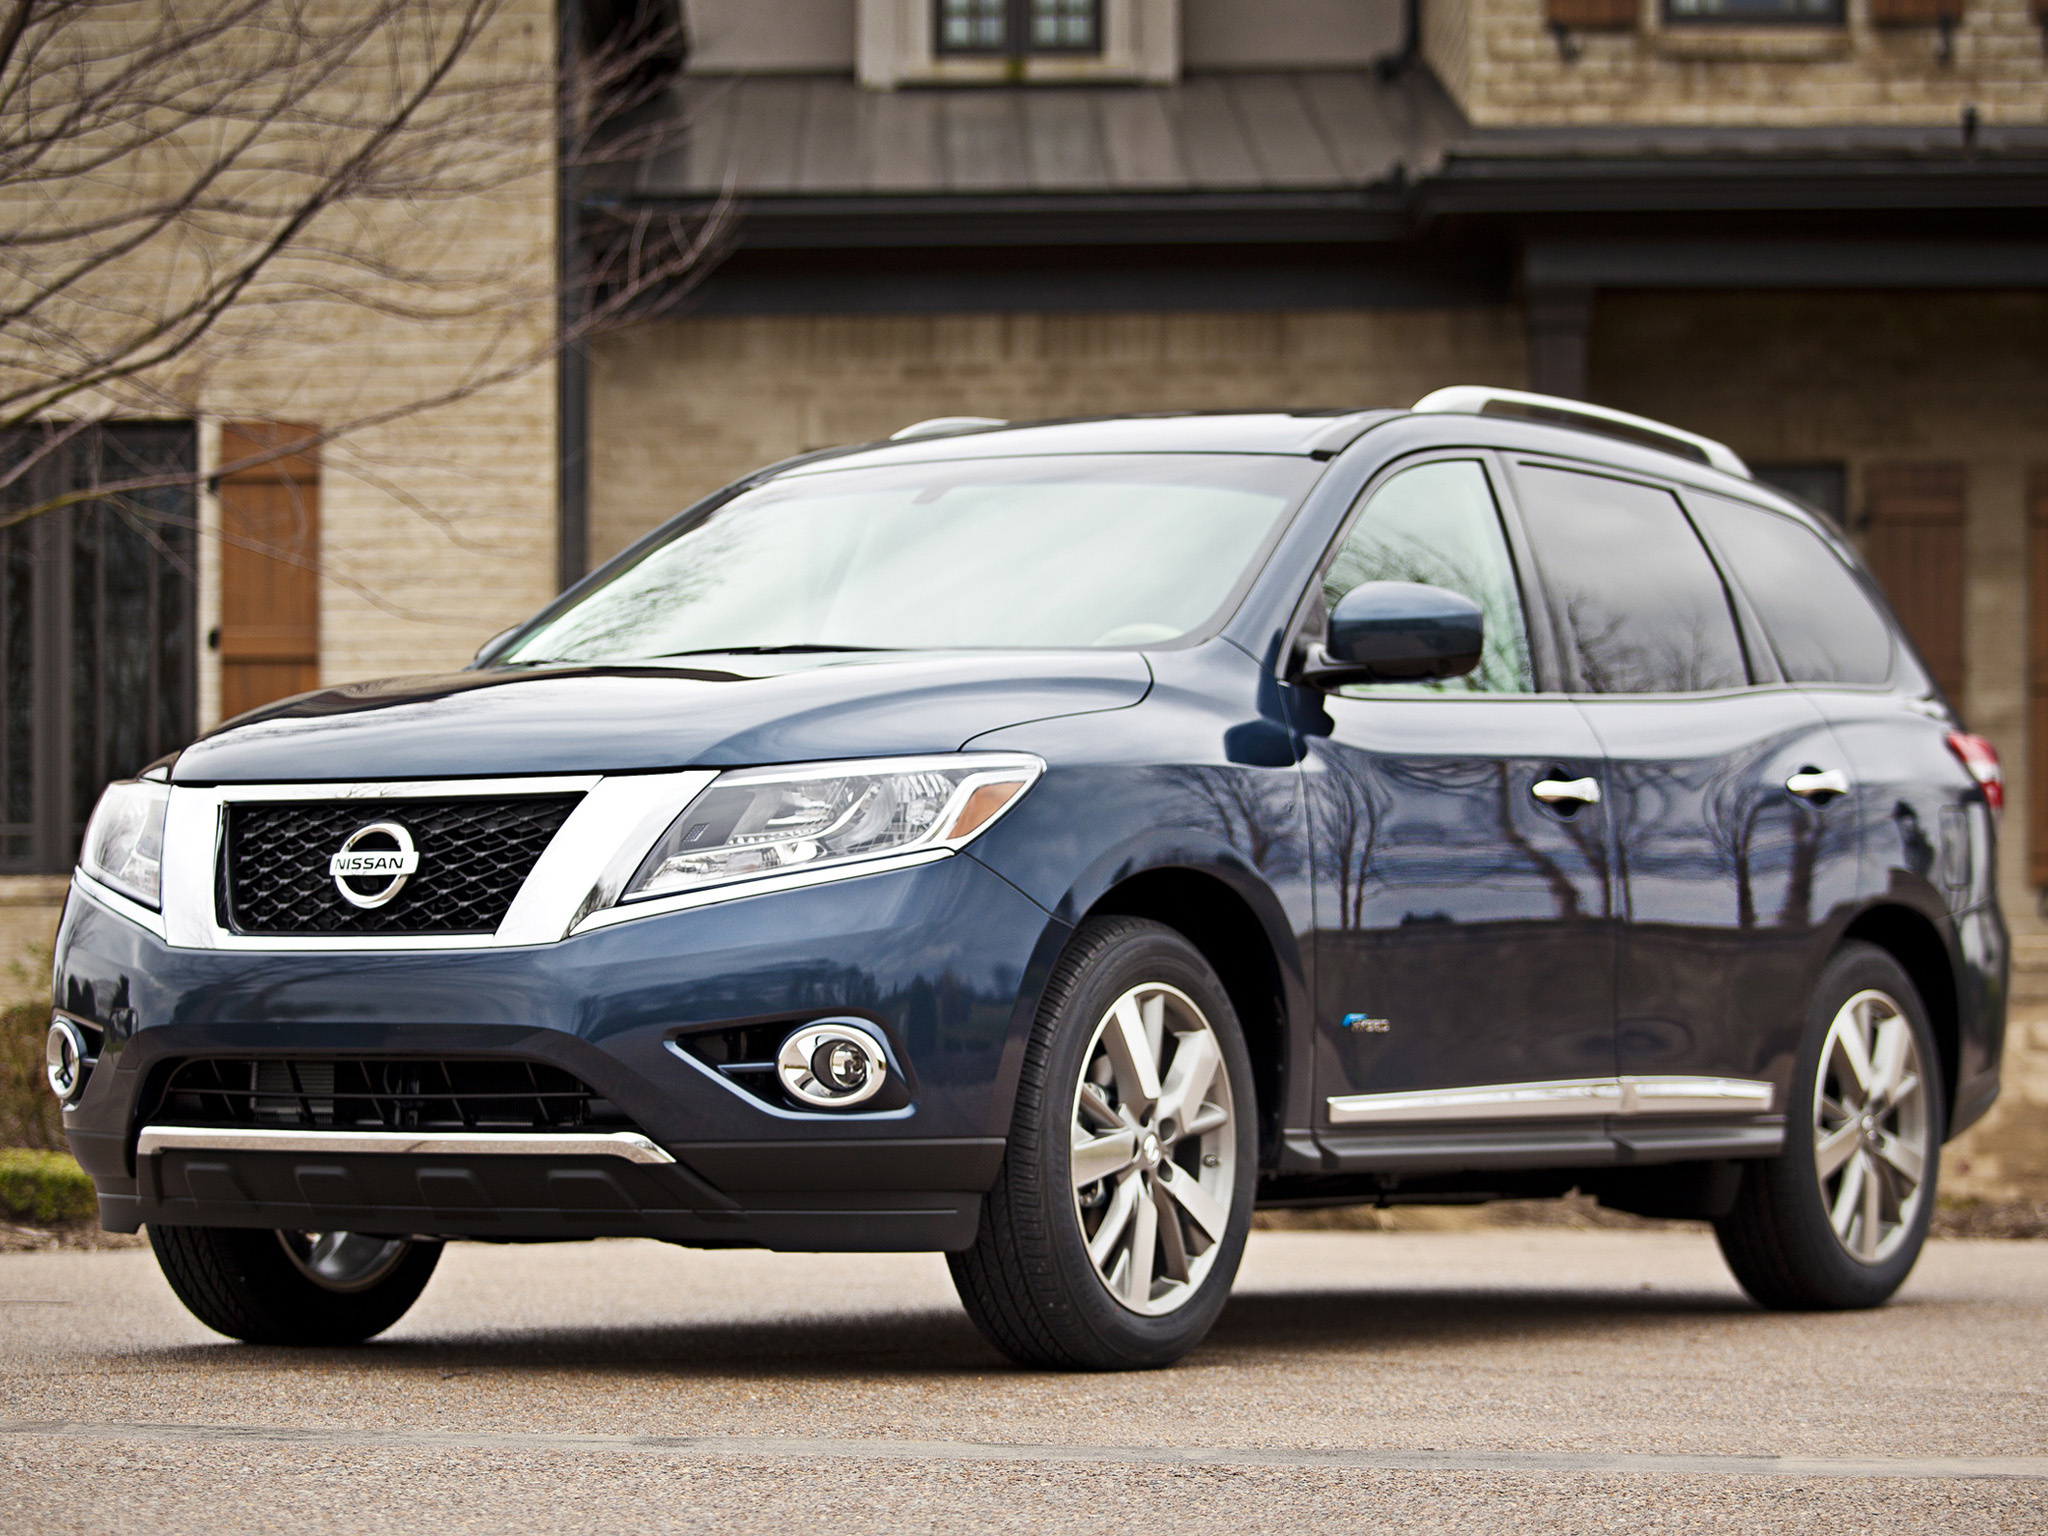 Nissan Pathfinder, Auto industry, Picture gallery, Captivating photos, 2050x1540 HD Desktop